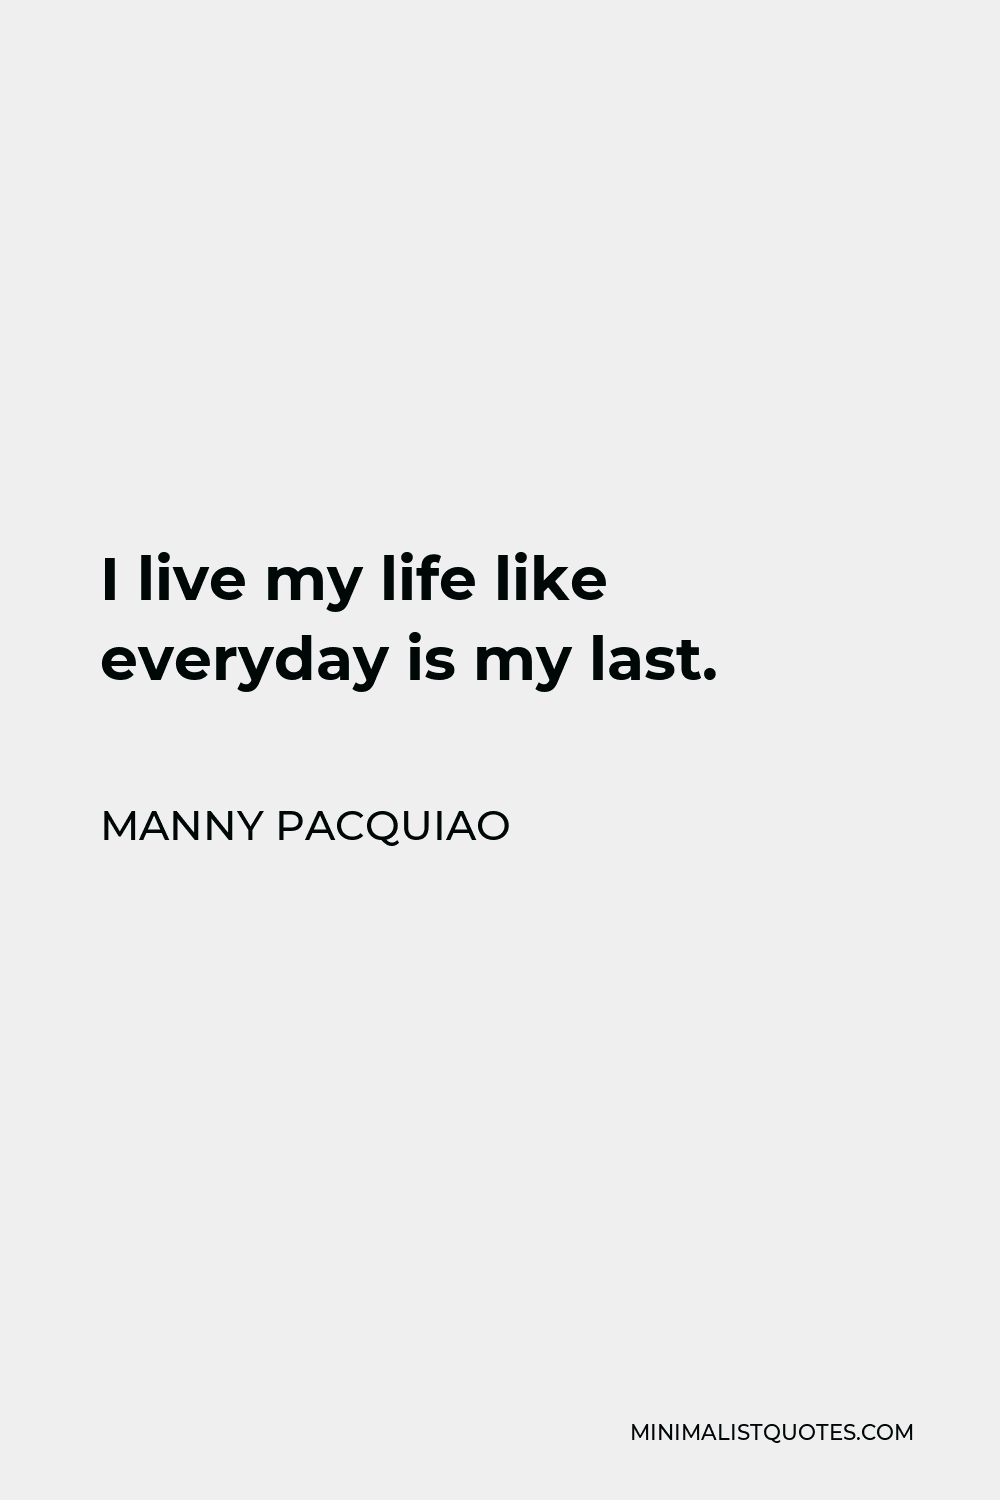 Manny Pacquiao Quote - I live my life like everyday is my last.